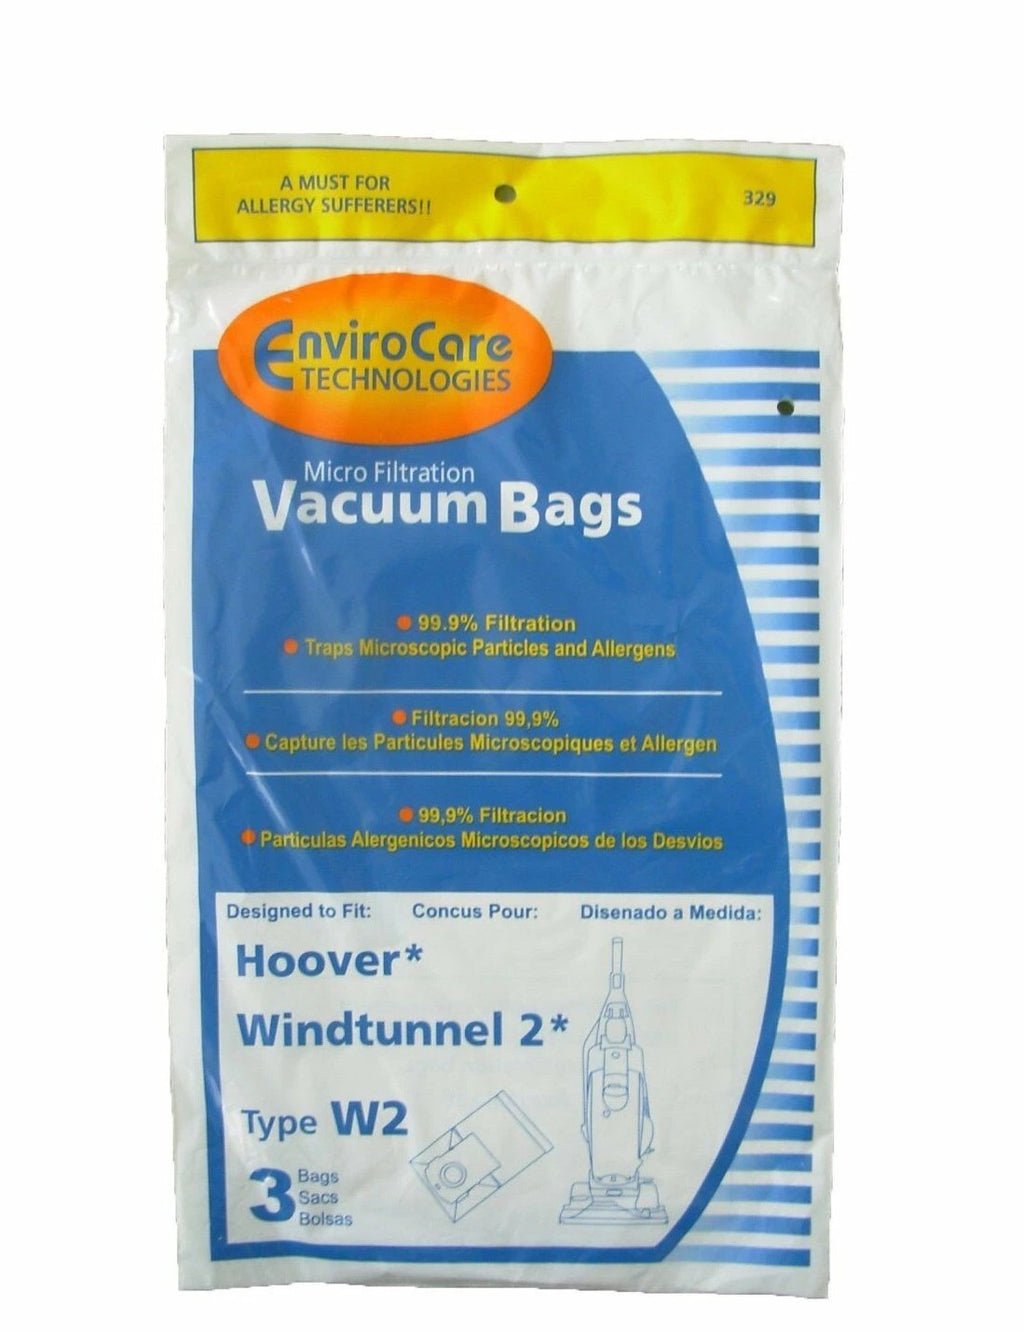 3 Vacuum Bags, Hoover Type W2 Windtunnel 401080W2, Part 329